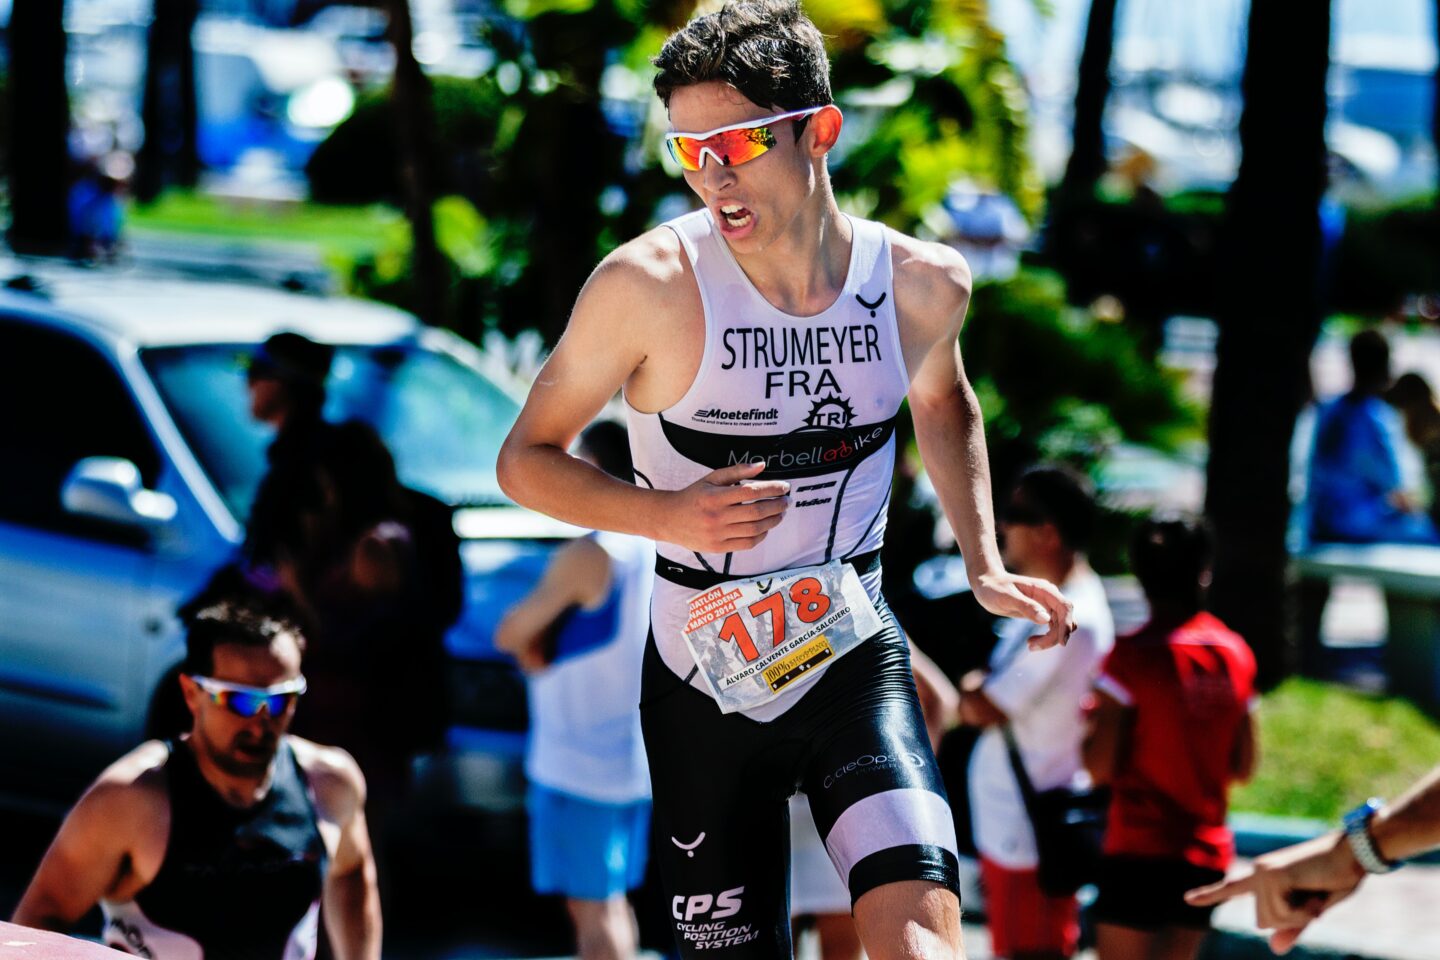 triathlete competing in the heat